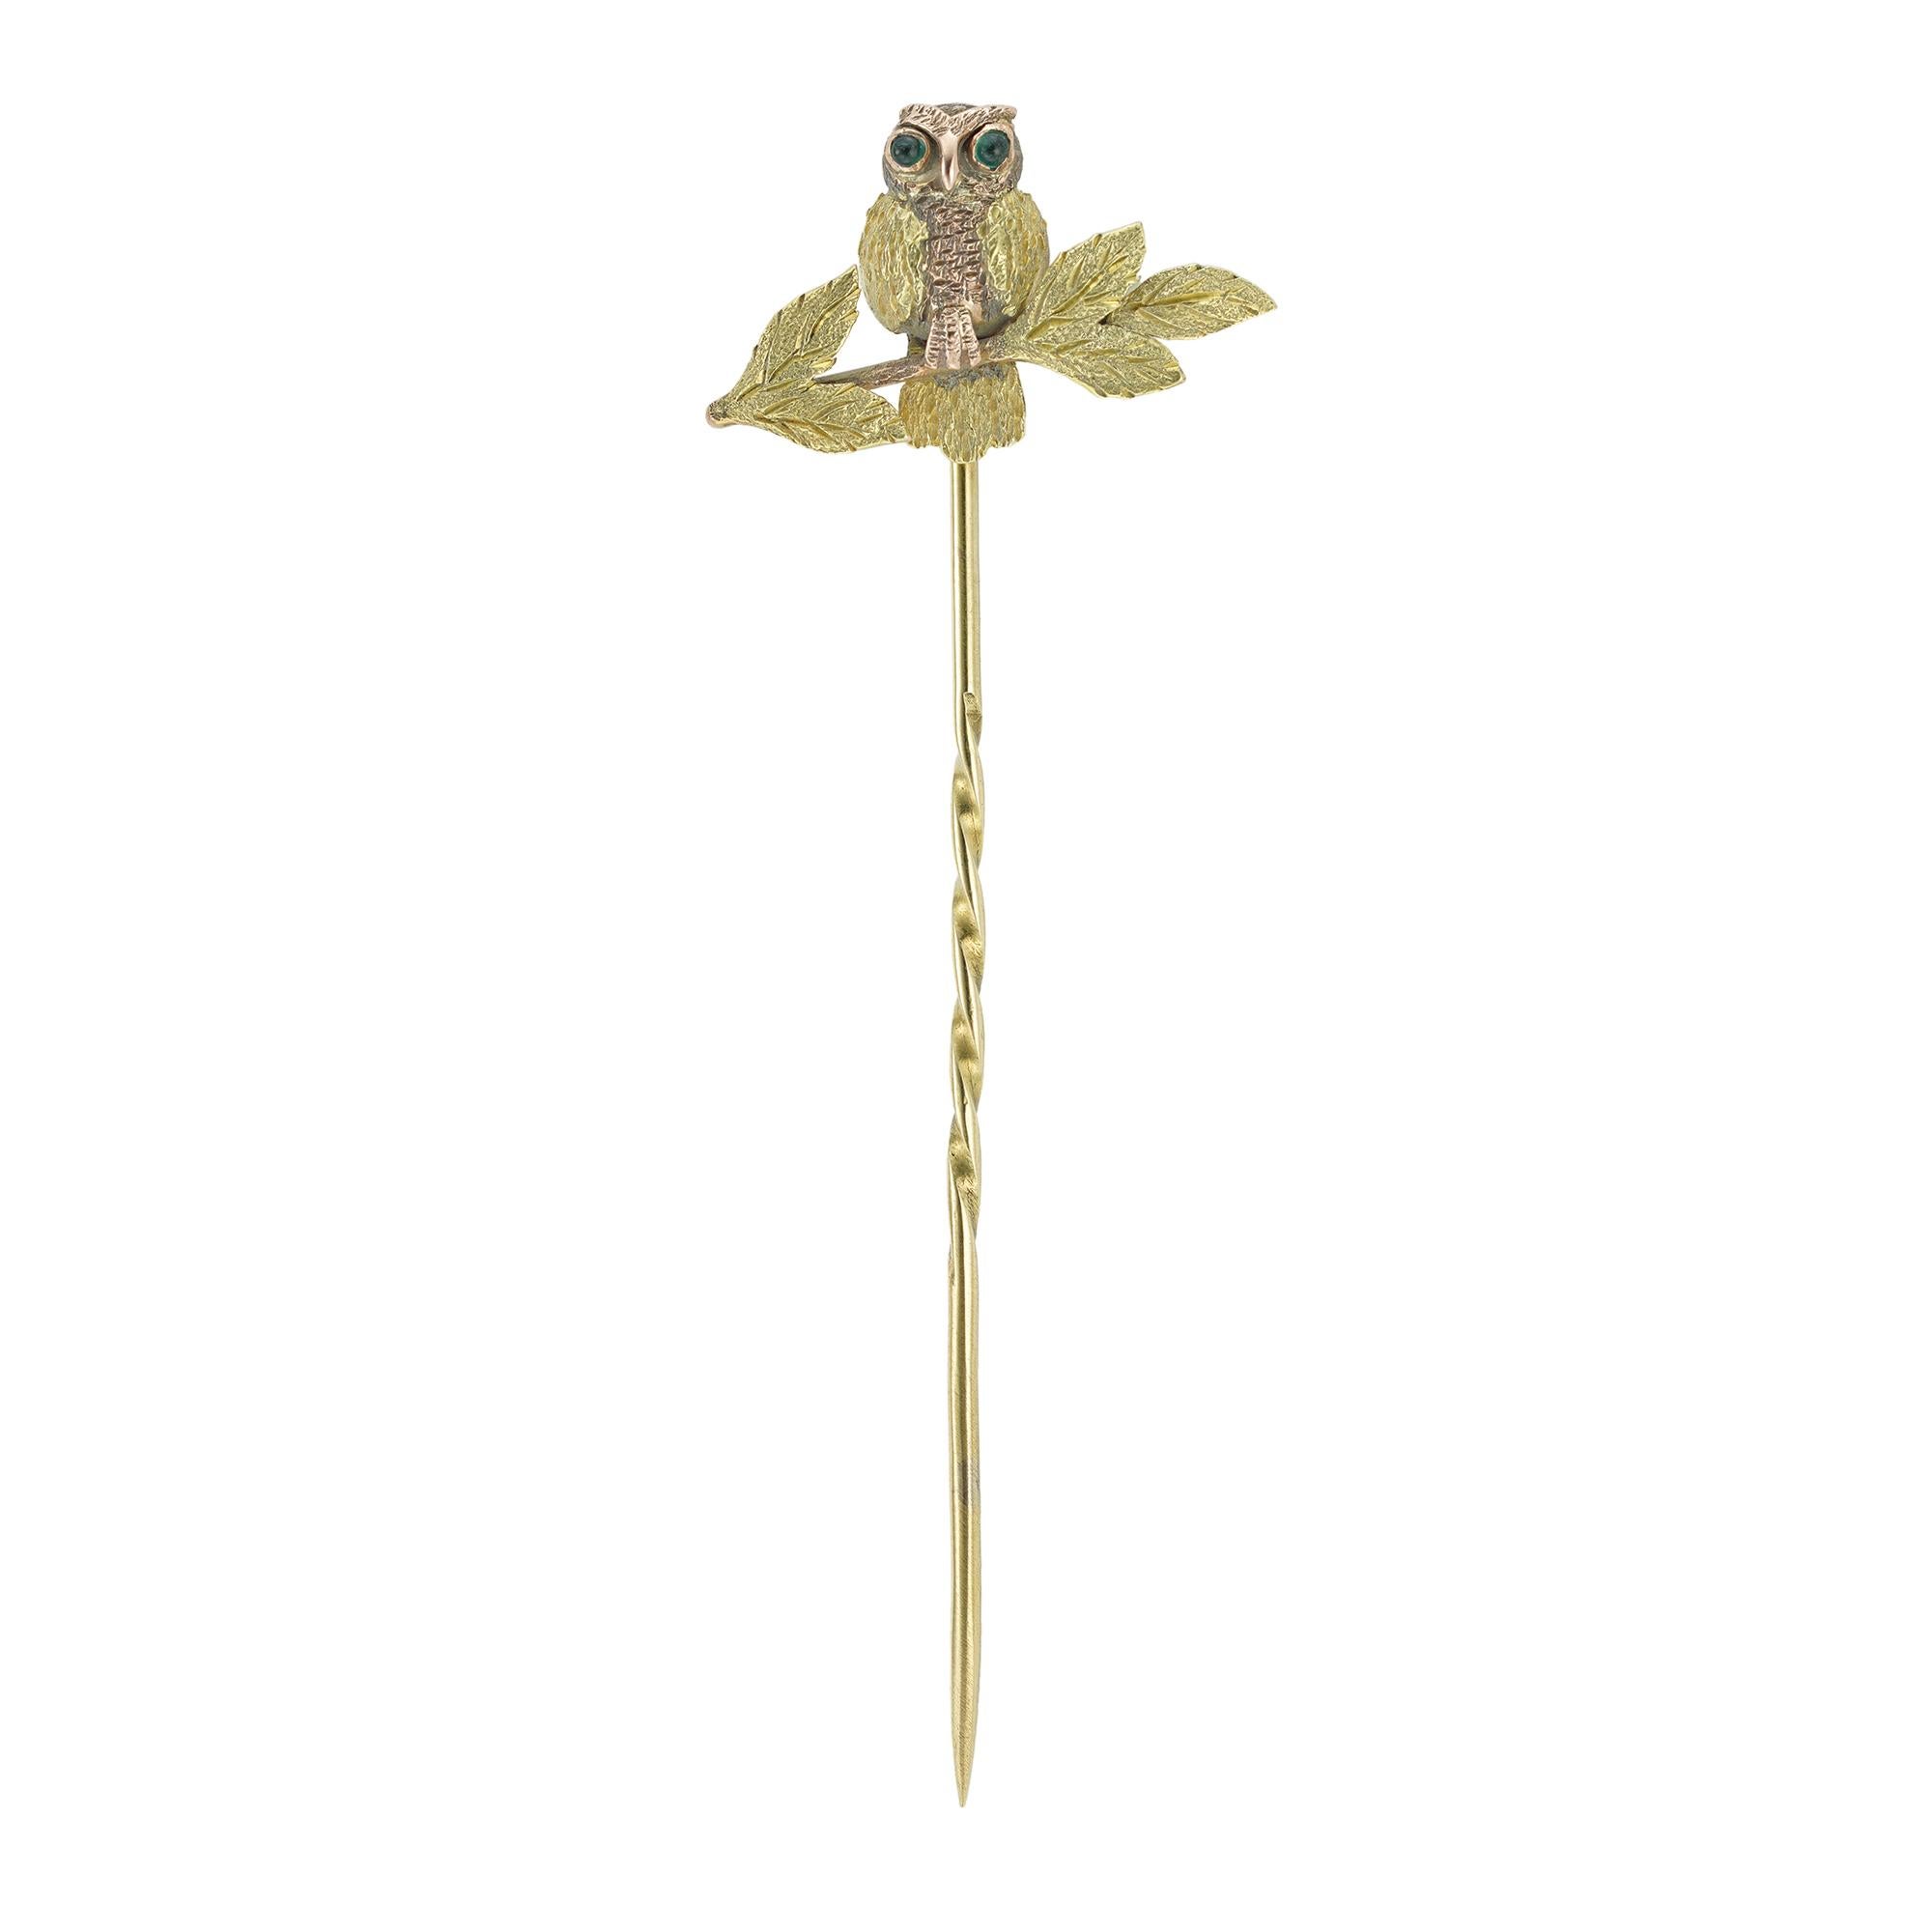 A Victorian gold owl stick-pin, the two-colour gold owl sitting on a branch with leaves, set with two cabochon-cut emerald-set eyes, all made in gold marked 9ct, with gold pin fitting, circa 1890, the jewelled part measuring 2.1 x 0.8cm, gross